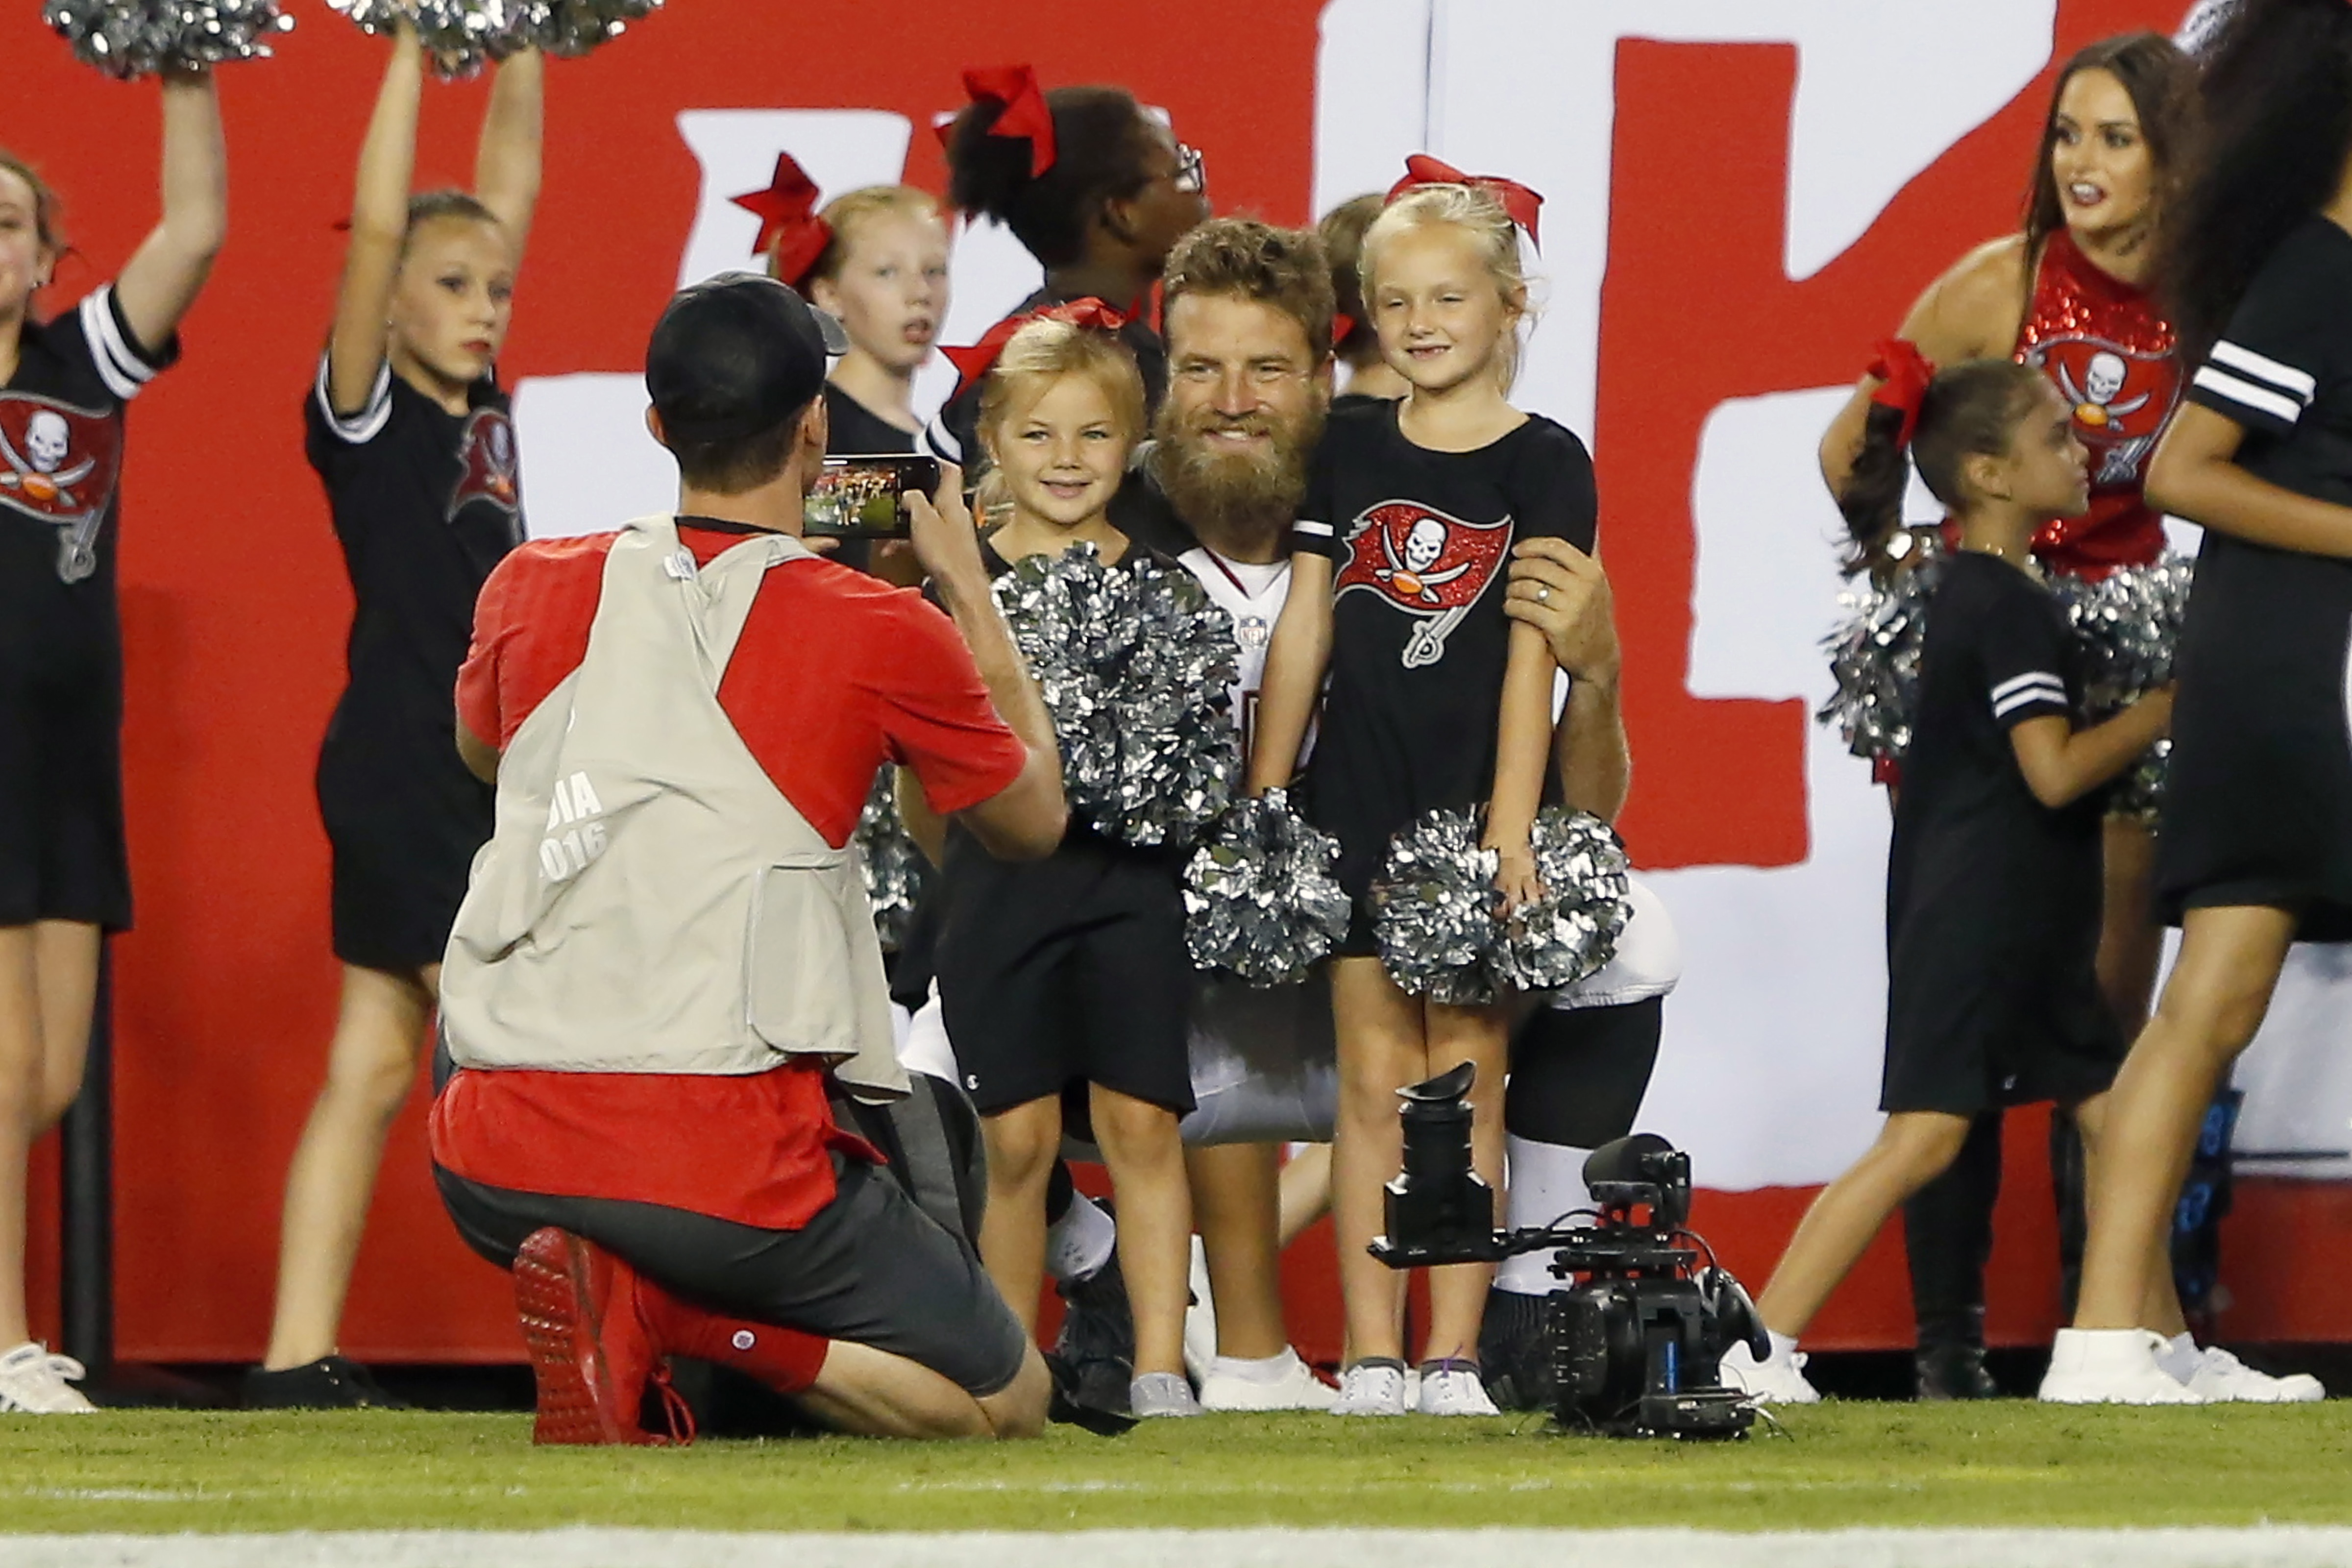 Ryan Fitzpatrick poses for a photographer with two of his girls at the start of half-time during a preseason game between on August 24, 2018, in Tampa, Florida | Source: Getty Images